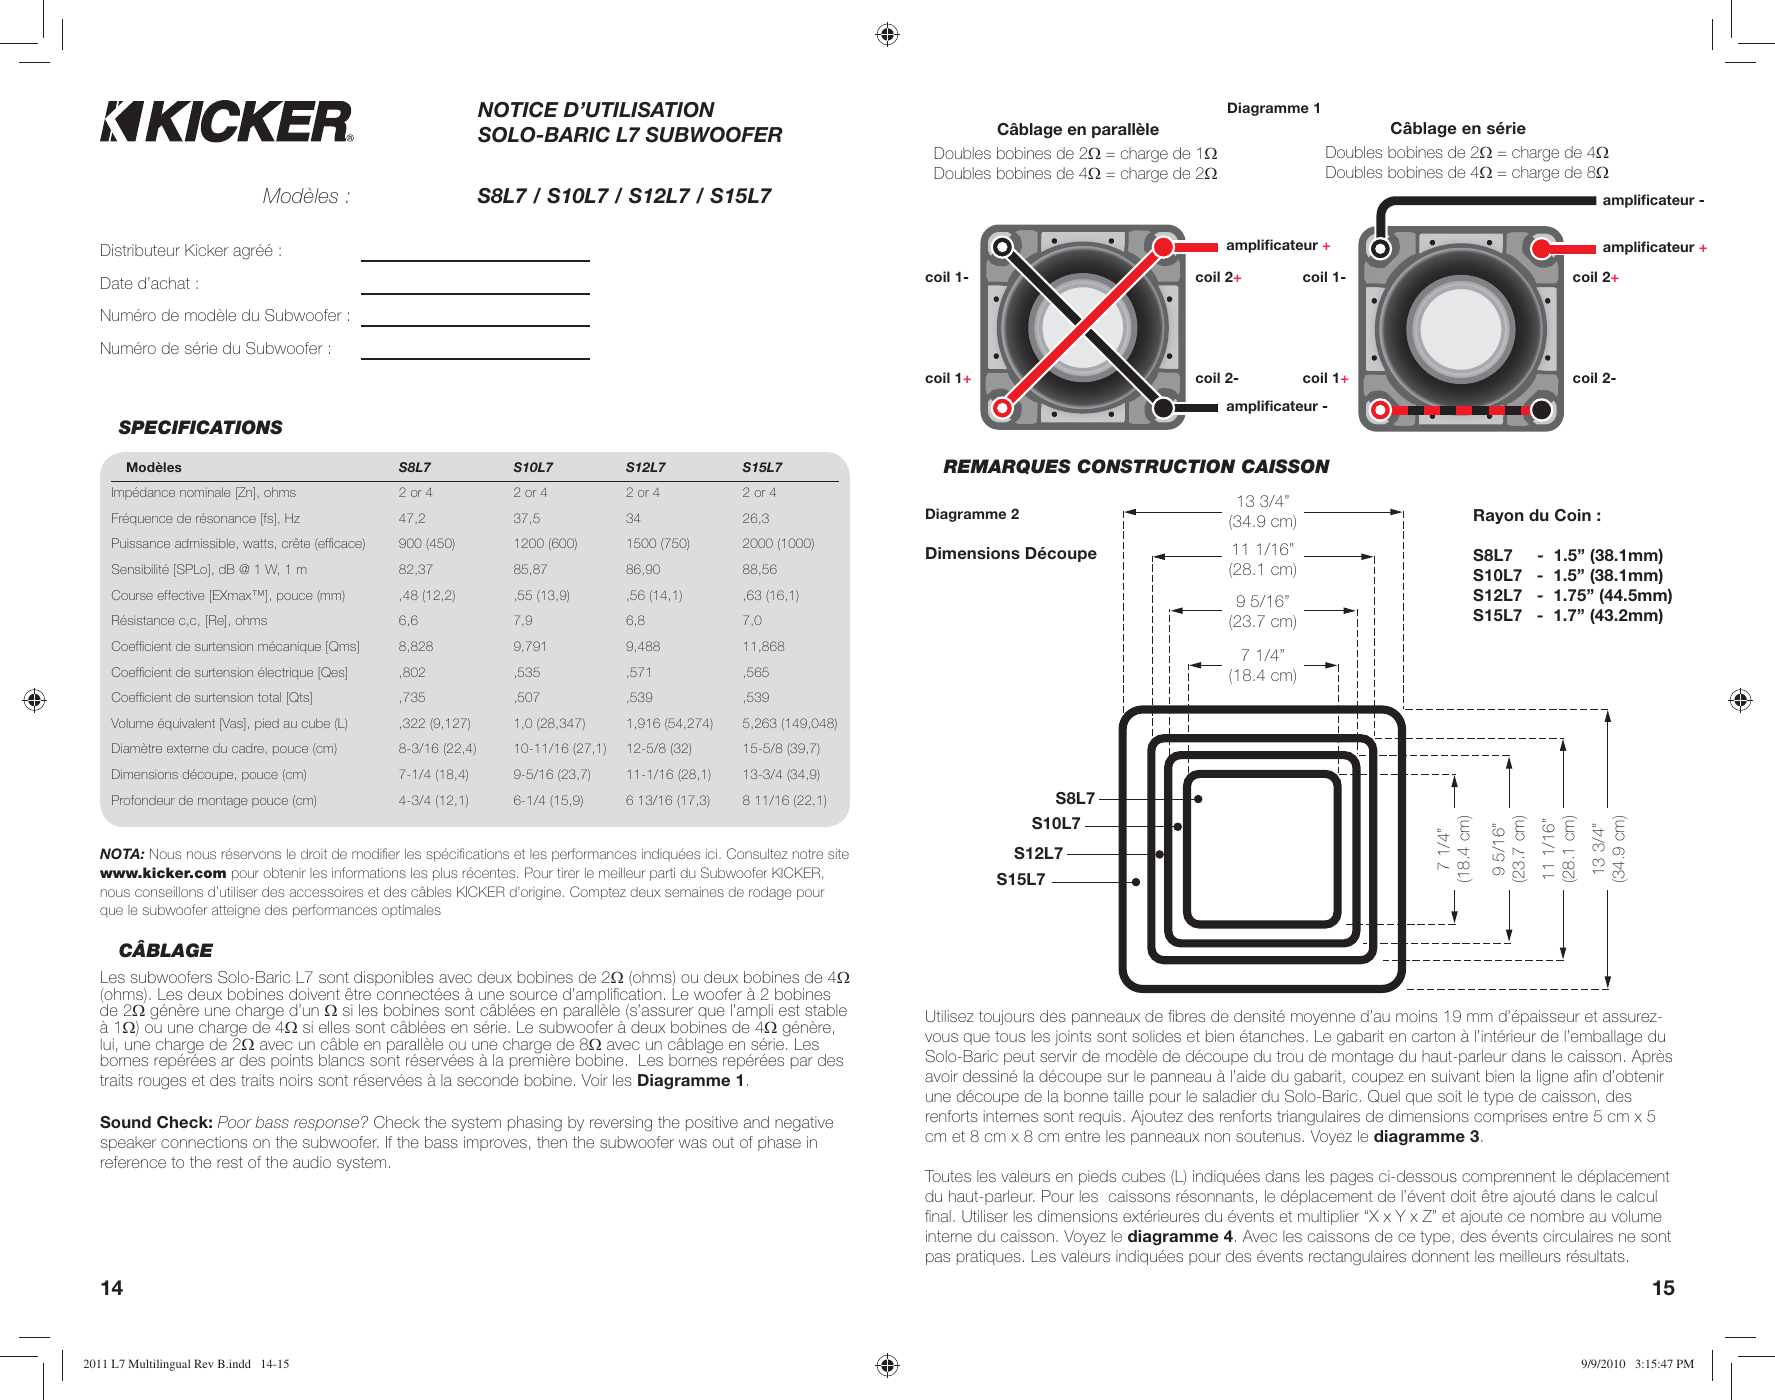 Page 8 of 11 - Kicker Kicker-2011-Solo-Baric-L7-Owners-Manual- 2011 L7 Multilingual Rev B  Kicker-2011-solo-baric-l7-owners-manual